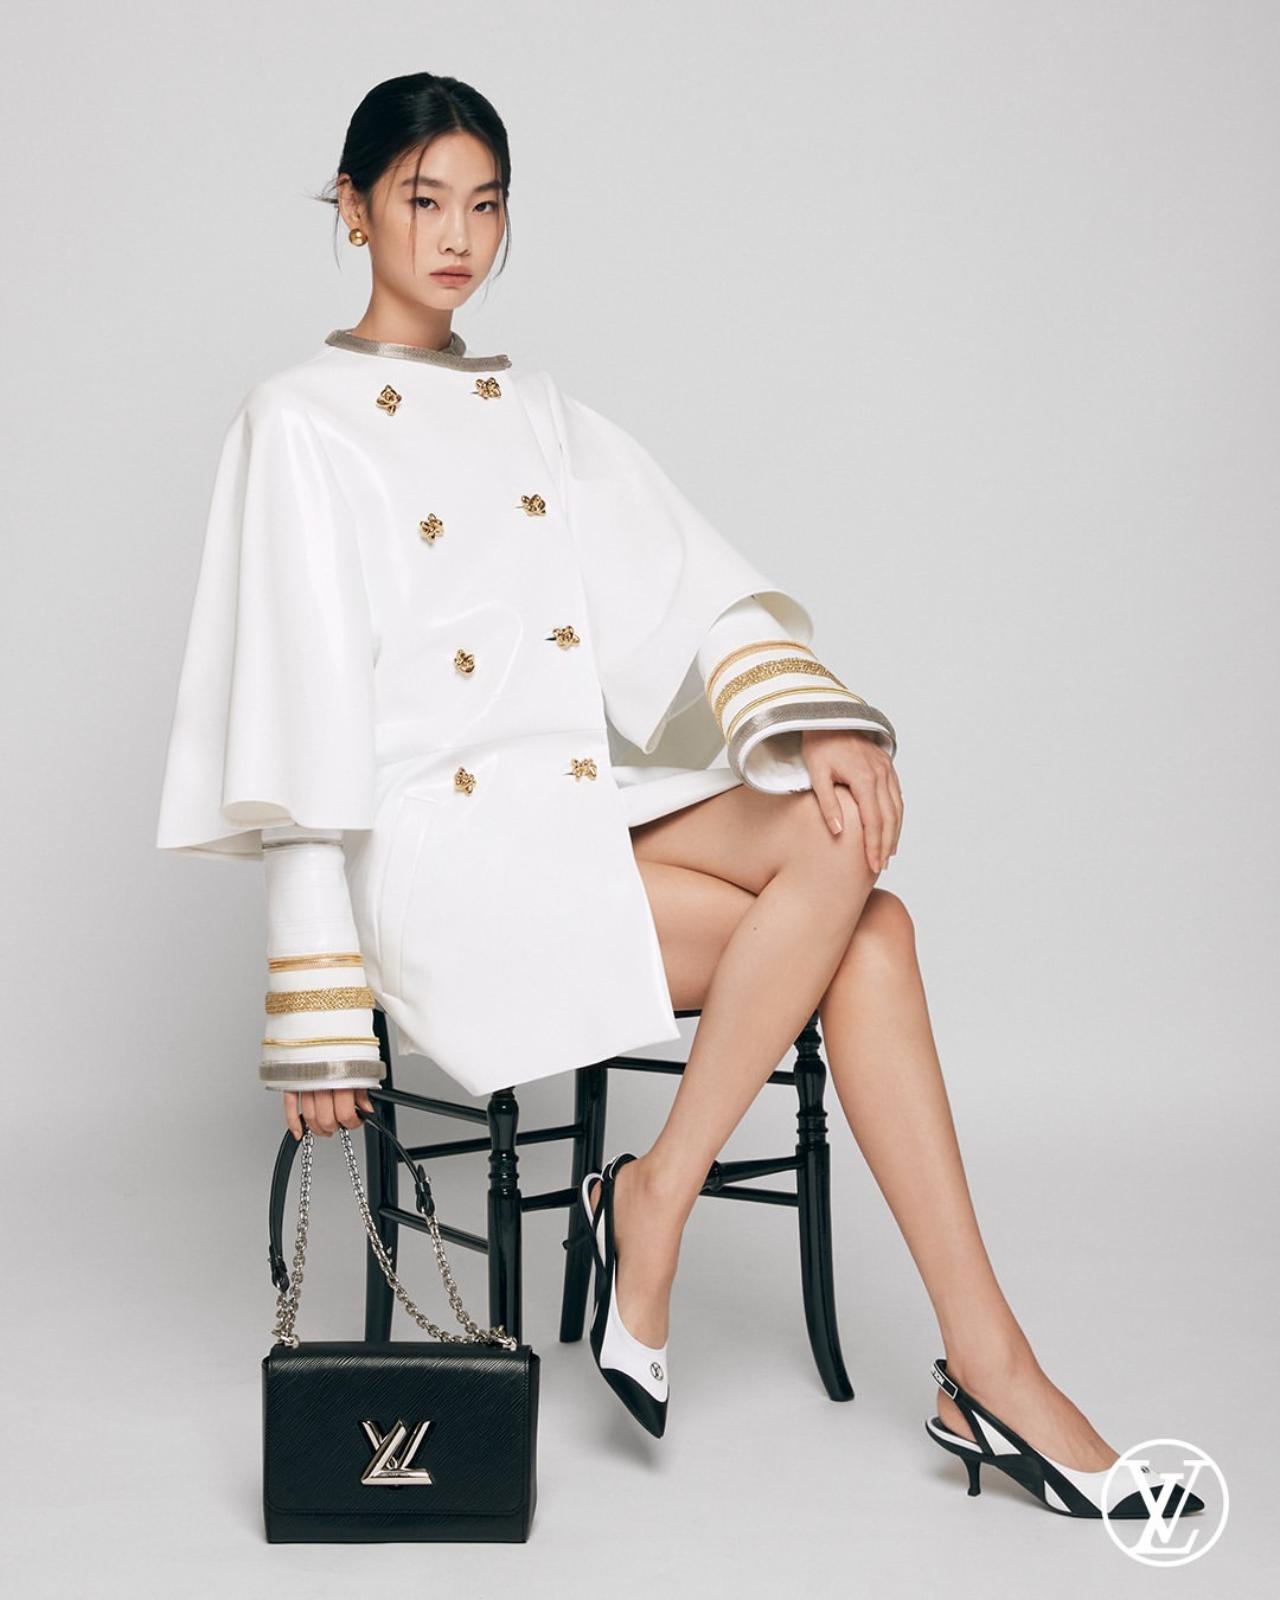 Ho-Yeon Jung for Louis Vuitton
Ho Yeon Jung became the most popular Korean actress on Instagram with over 12 million followers after her performance in 'Squid Game'. In October 2021, Louis Vuitton announced Jung as the Global House Ambassador for fashion, jewellery and watches